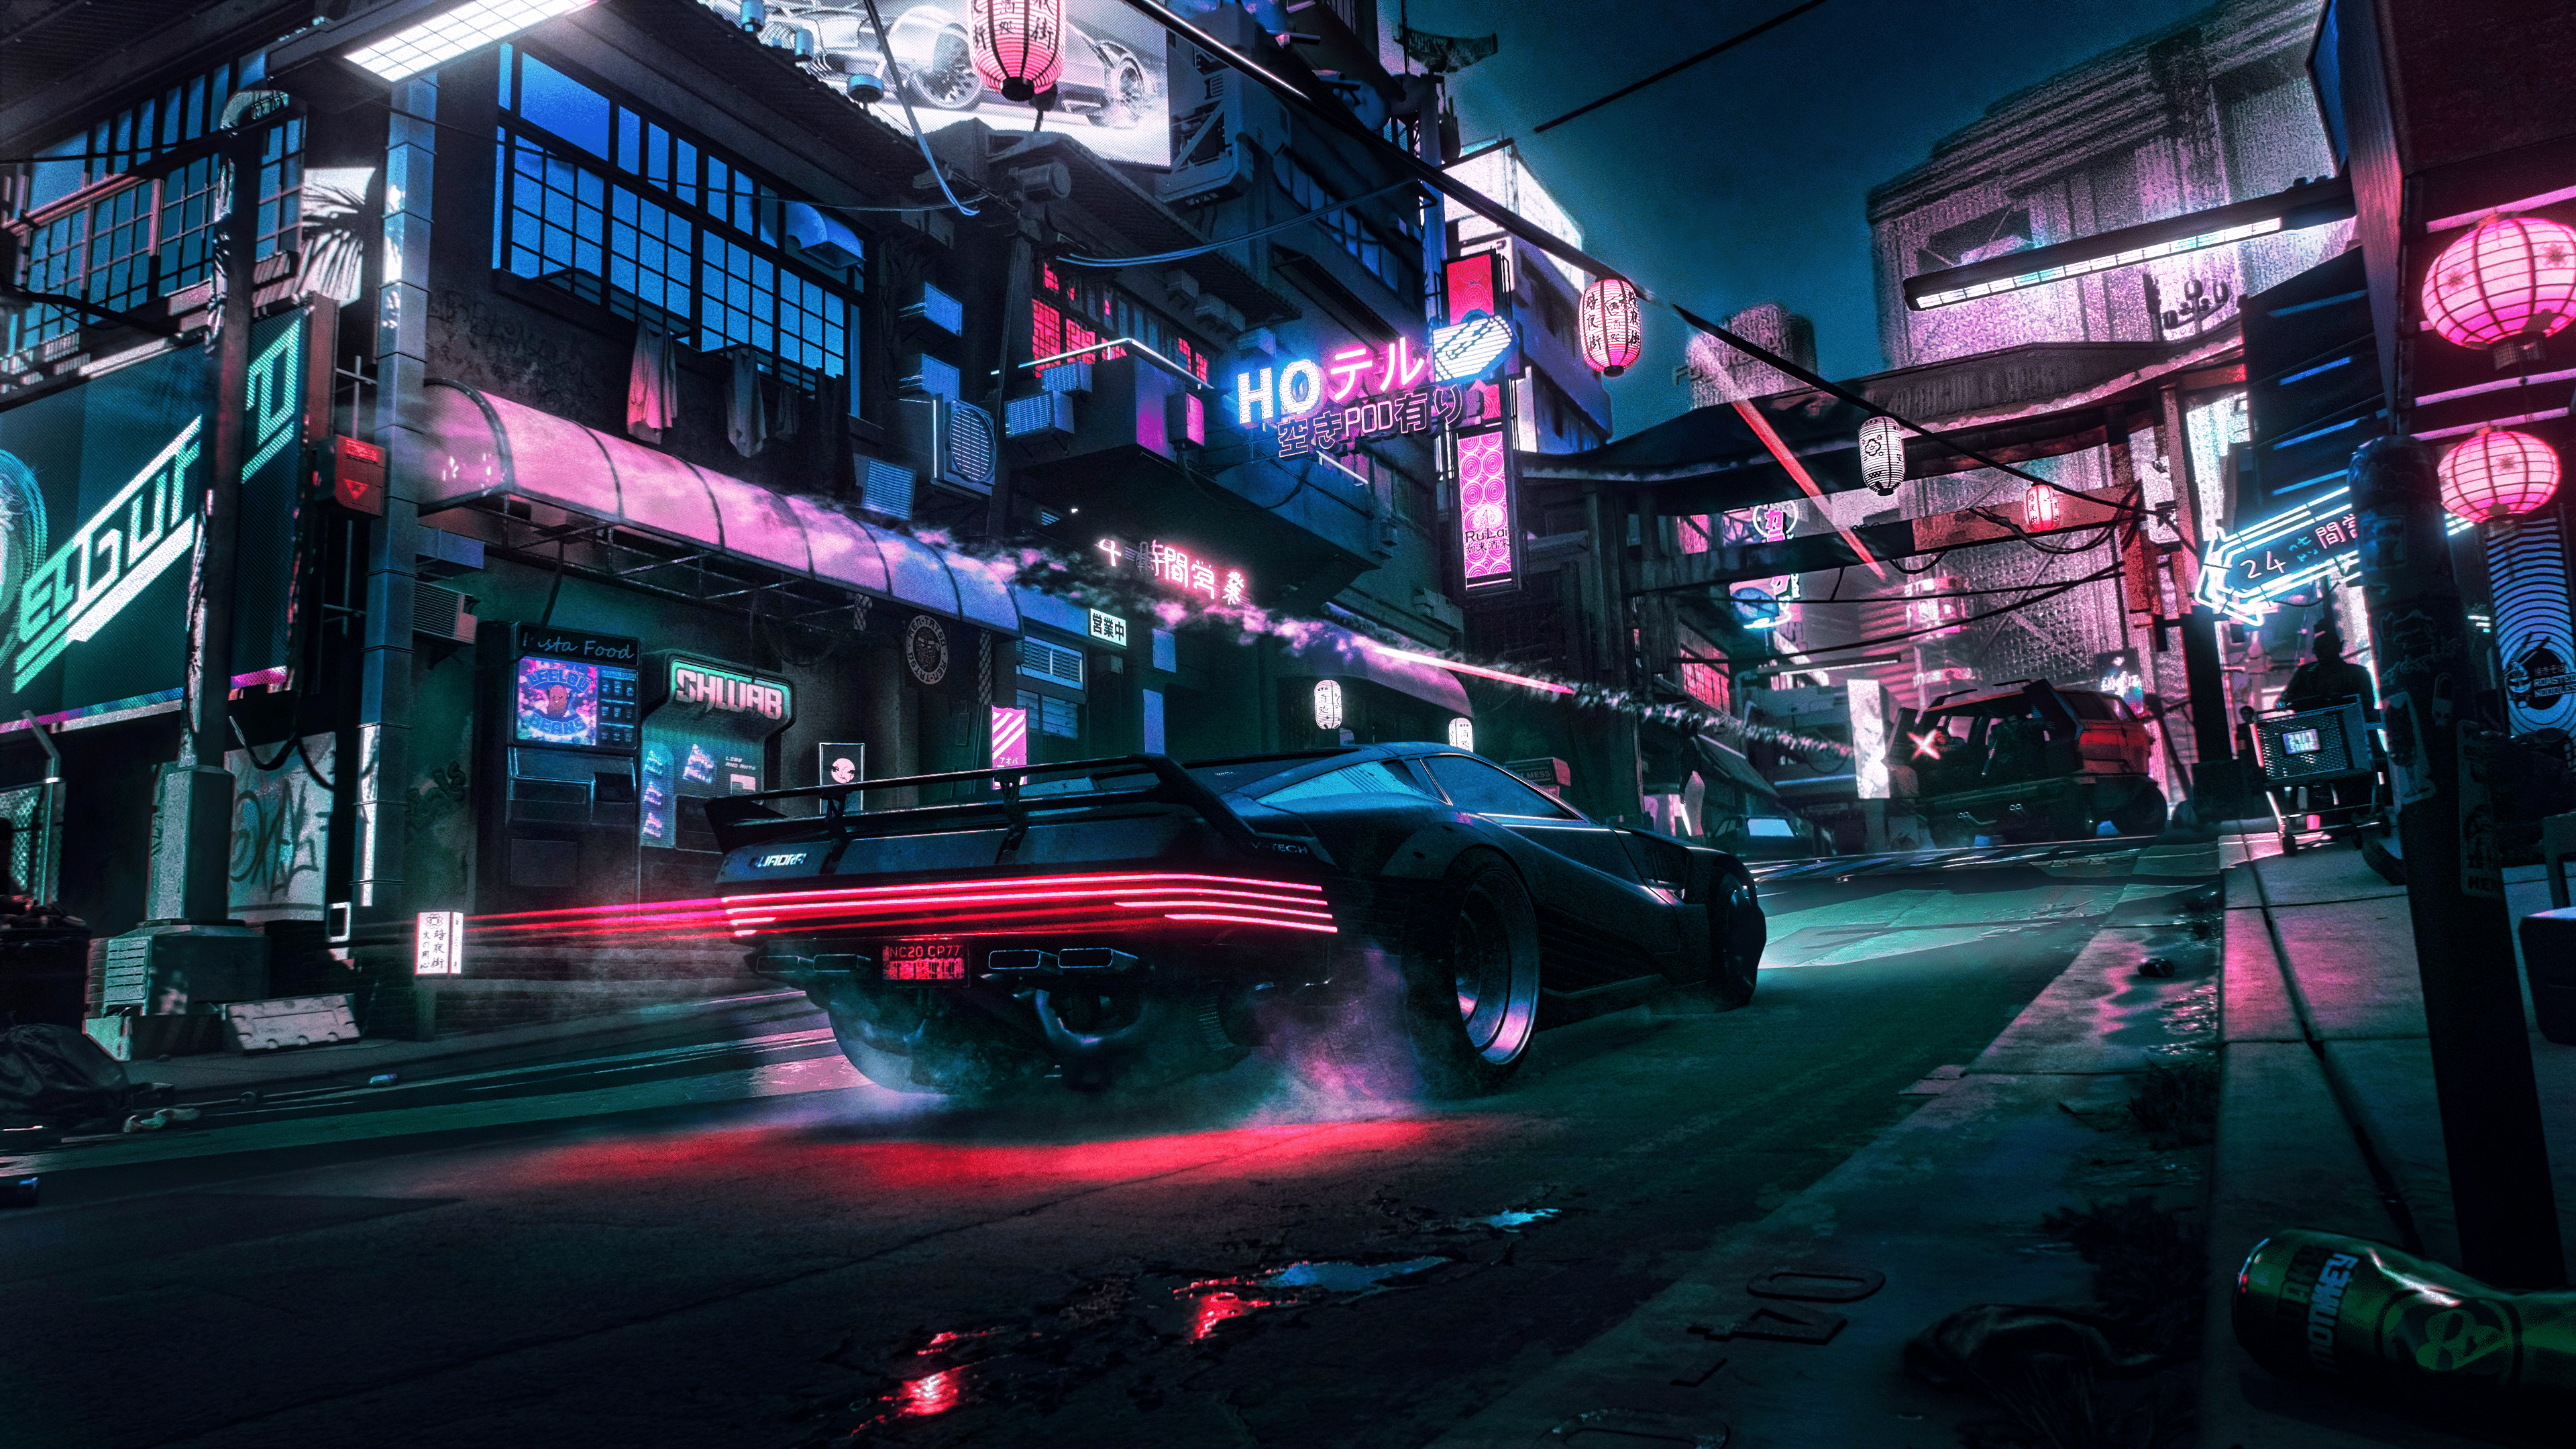 A car with neon lights on a street at night - Cyberpunk 2077